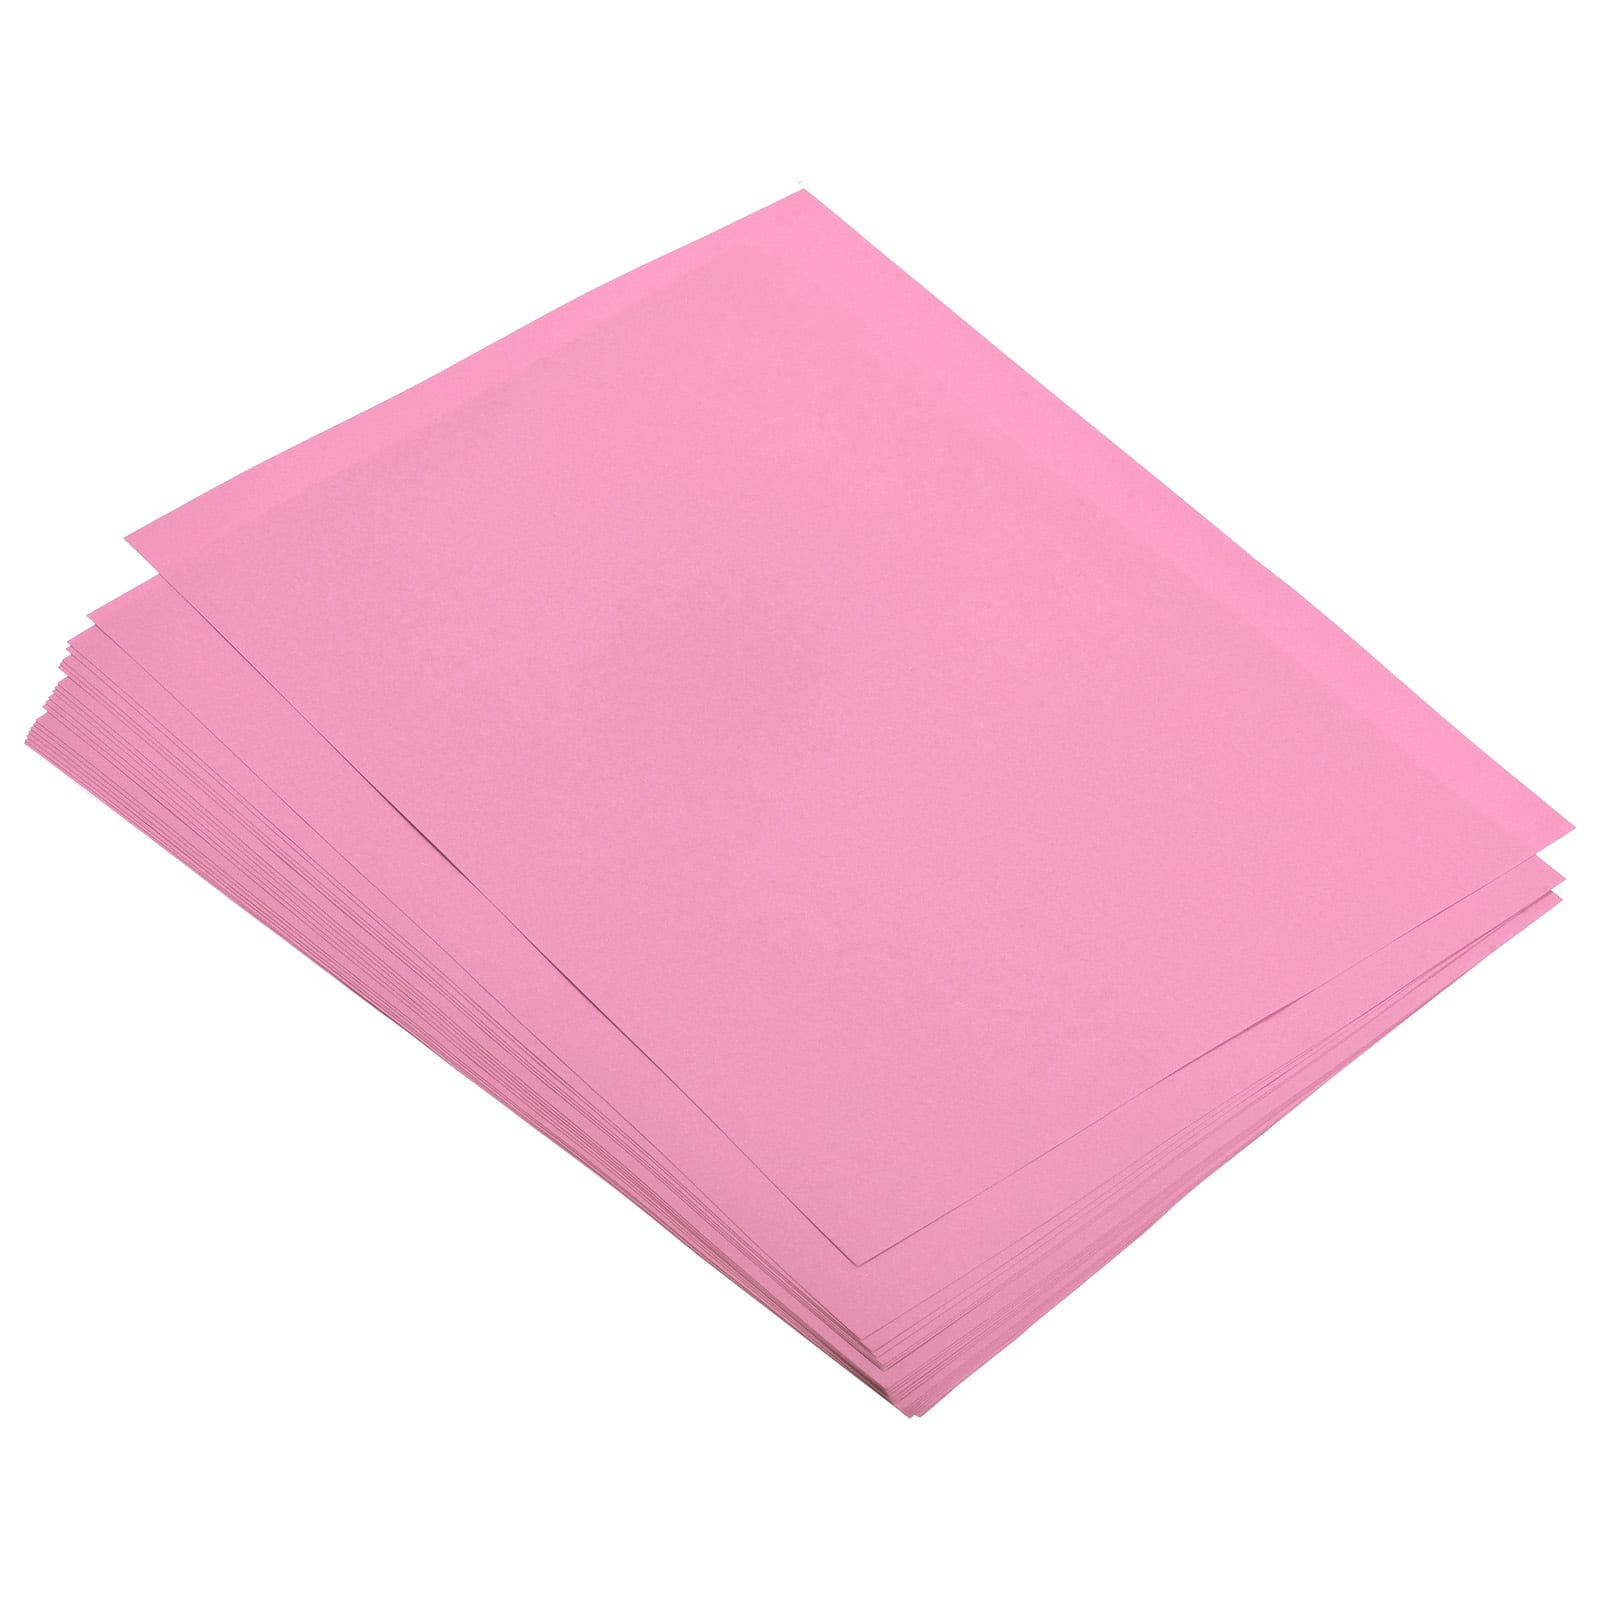 Uxcell Colored Copy Paper 8.5x11 Inch Printer Paper 22lb/80gsm Pink 50  Sheets for Office Printing